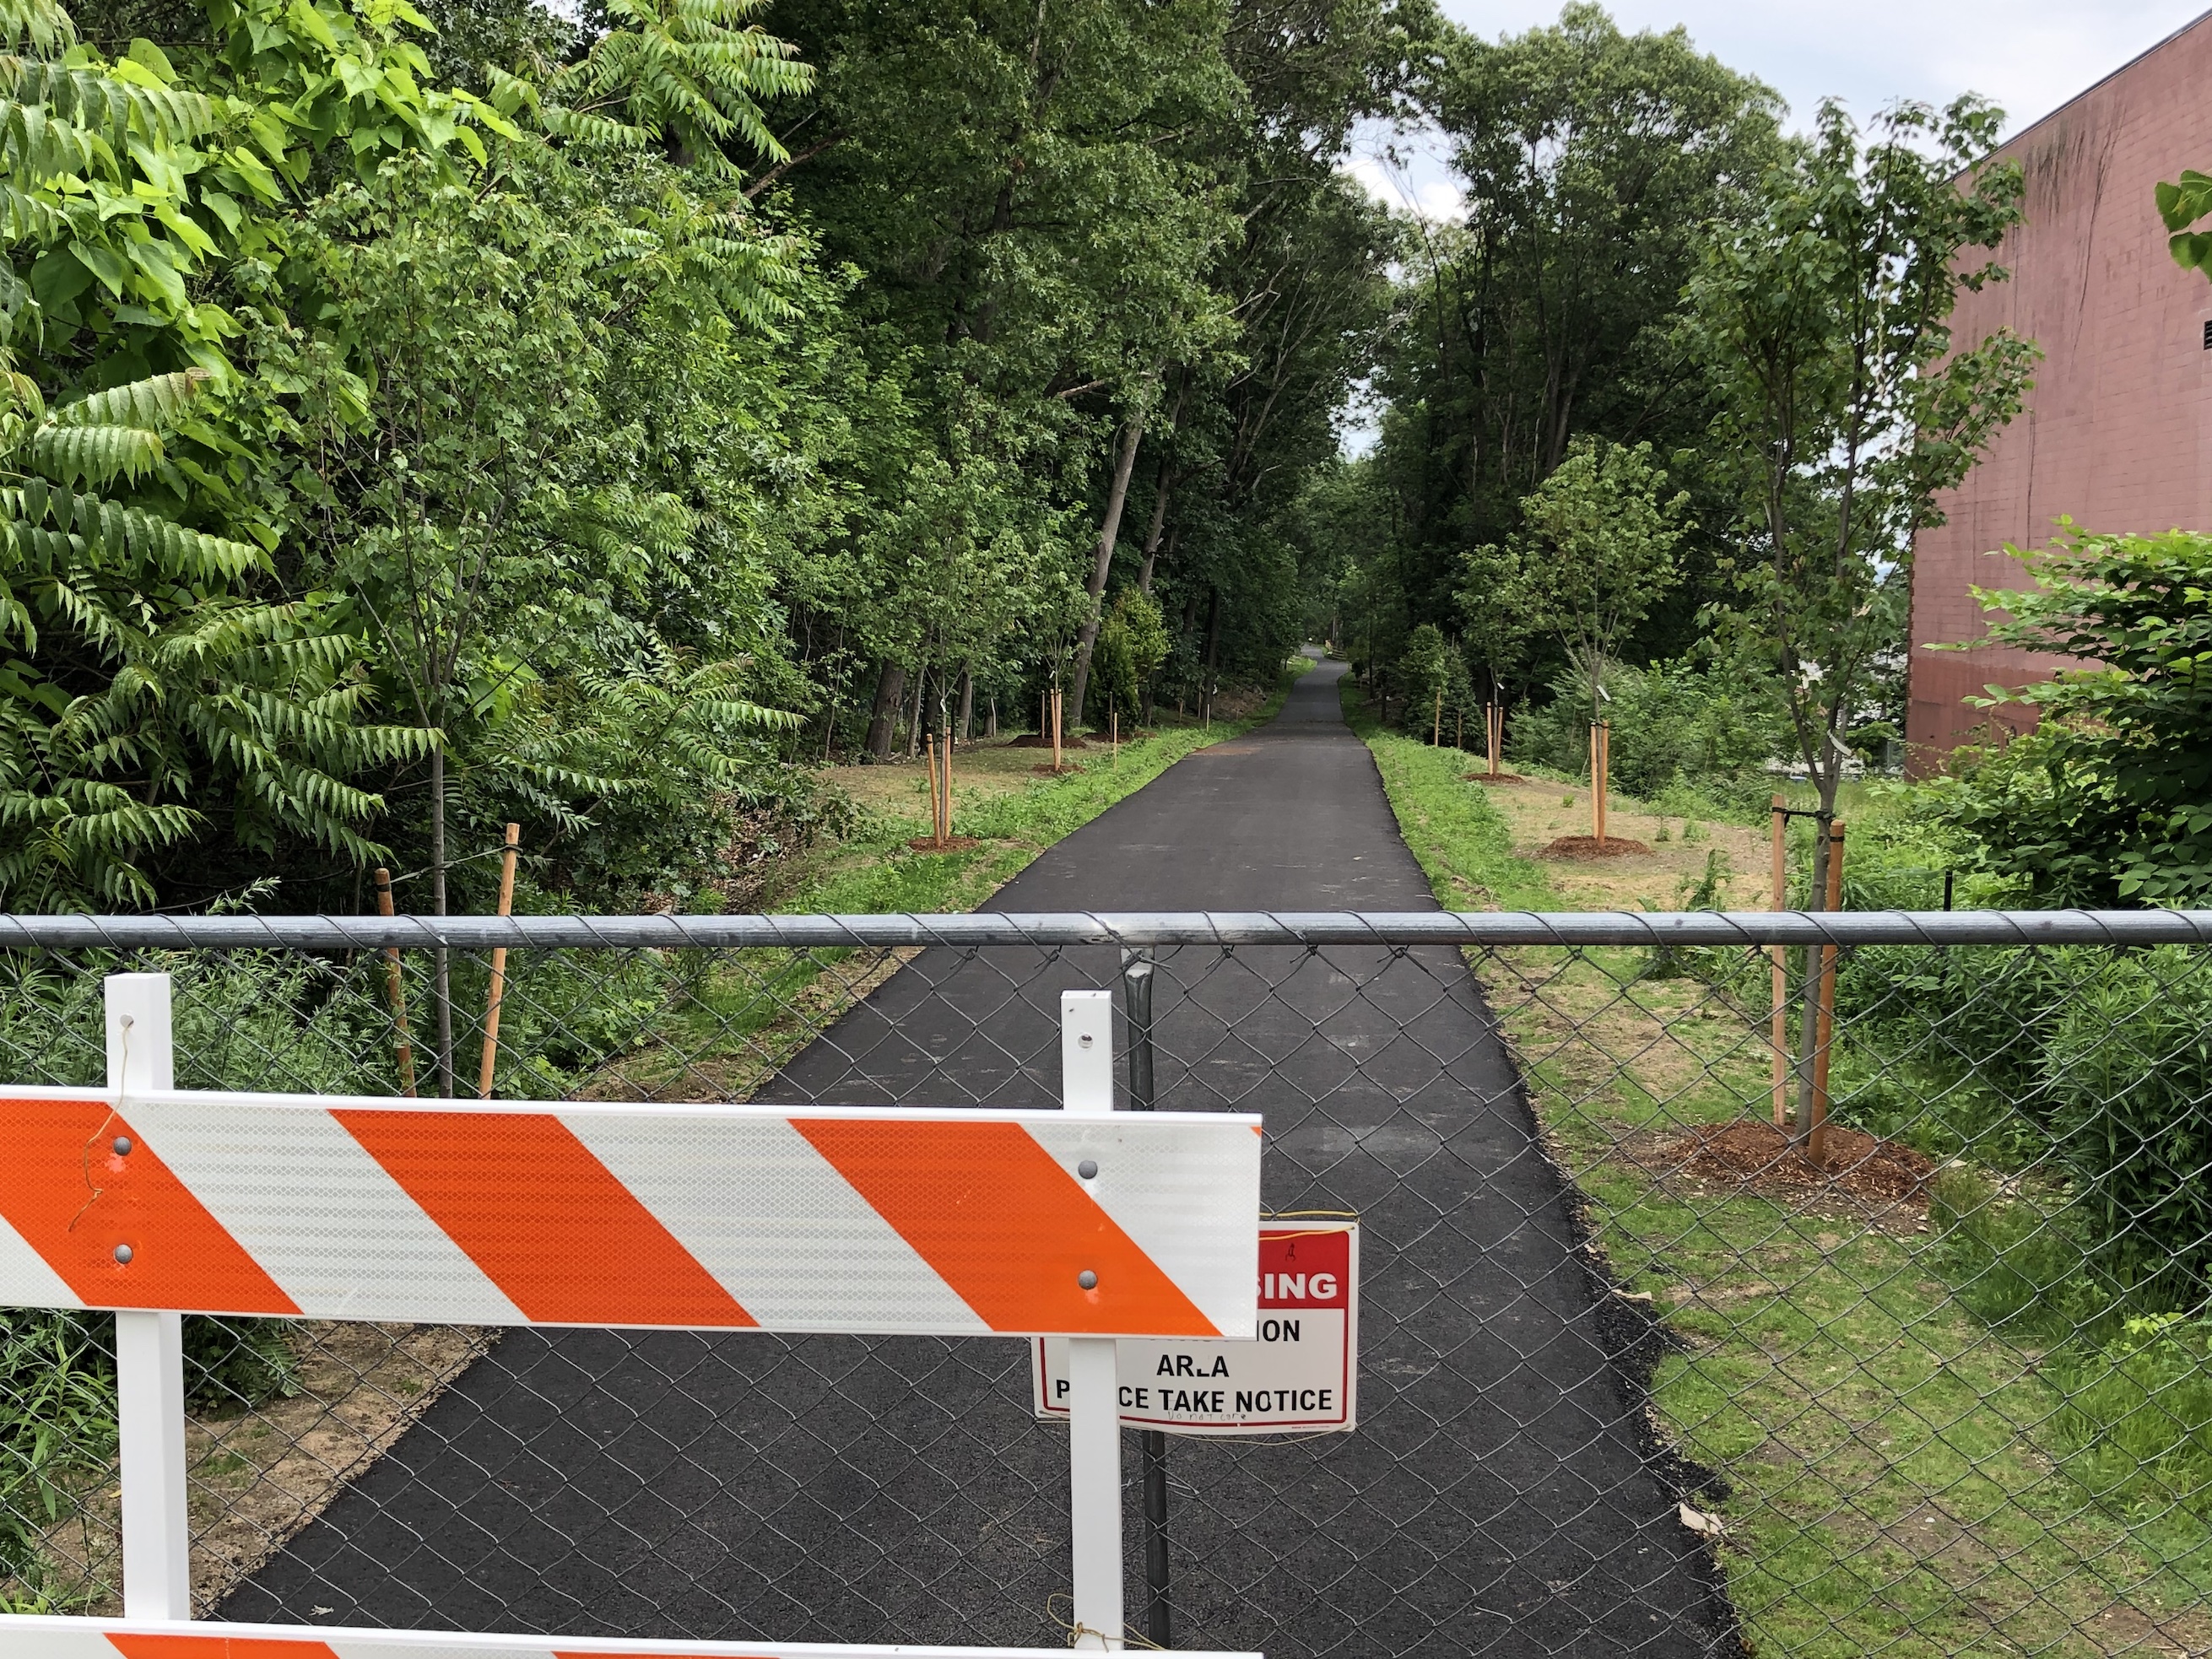 Fencing blocks a newly-paved trail through the woods. On the right is a tan-colored wall with no windows; on the right is a dense grove of trees. The trail disappears into the shade of a tunnel of trees in the distance.